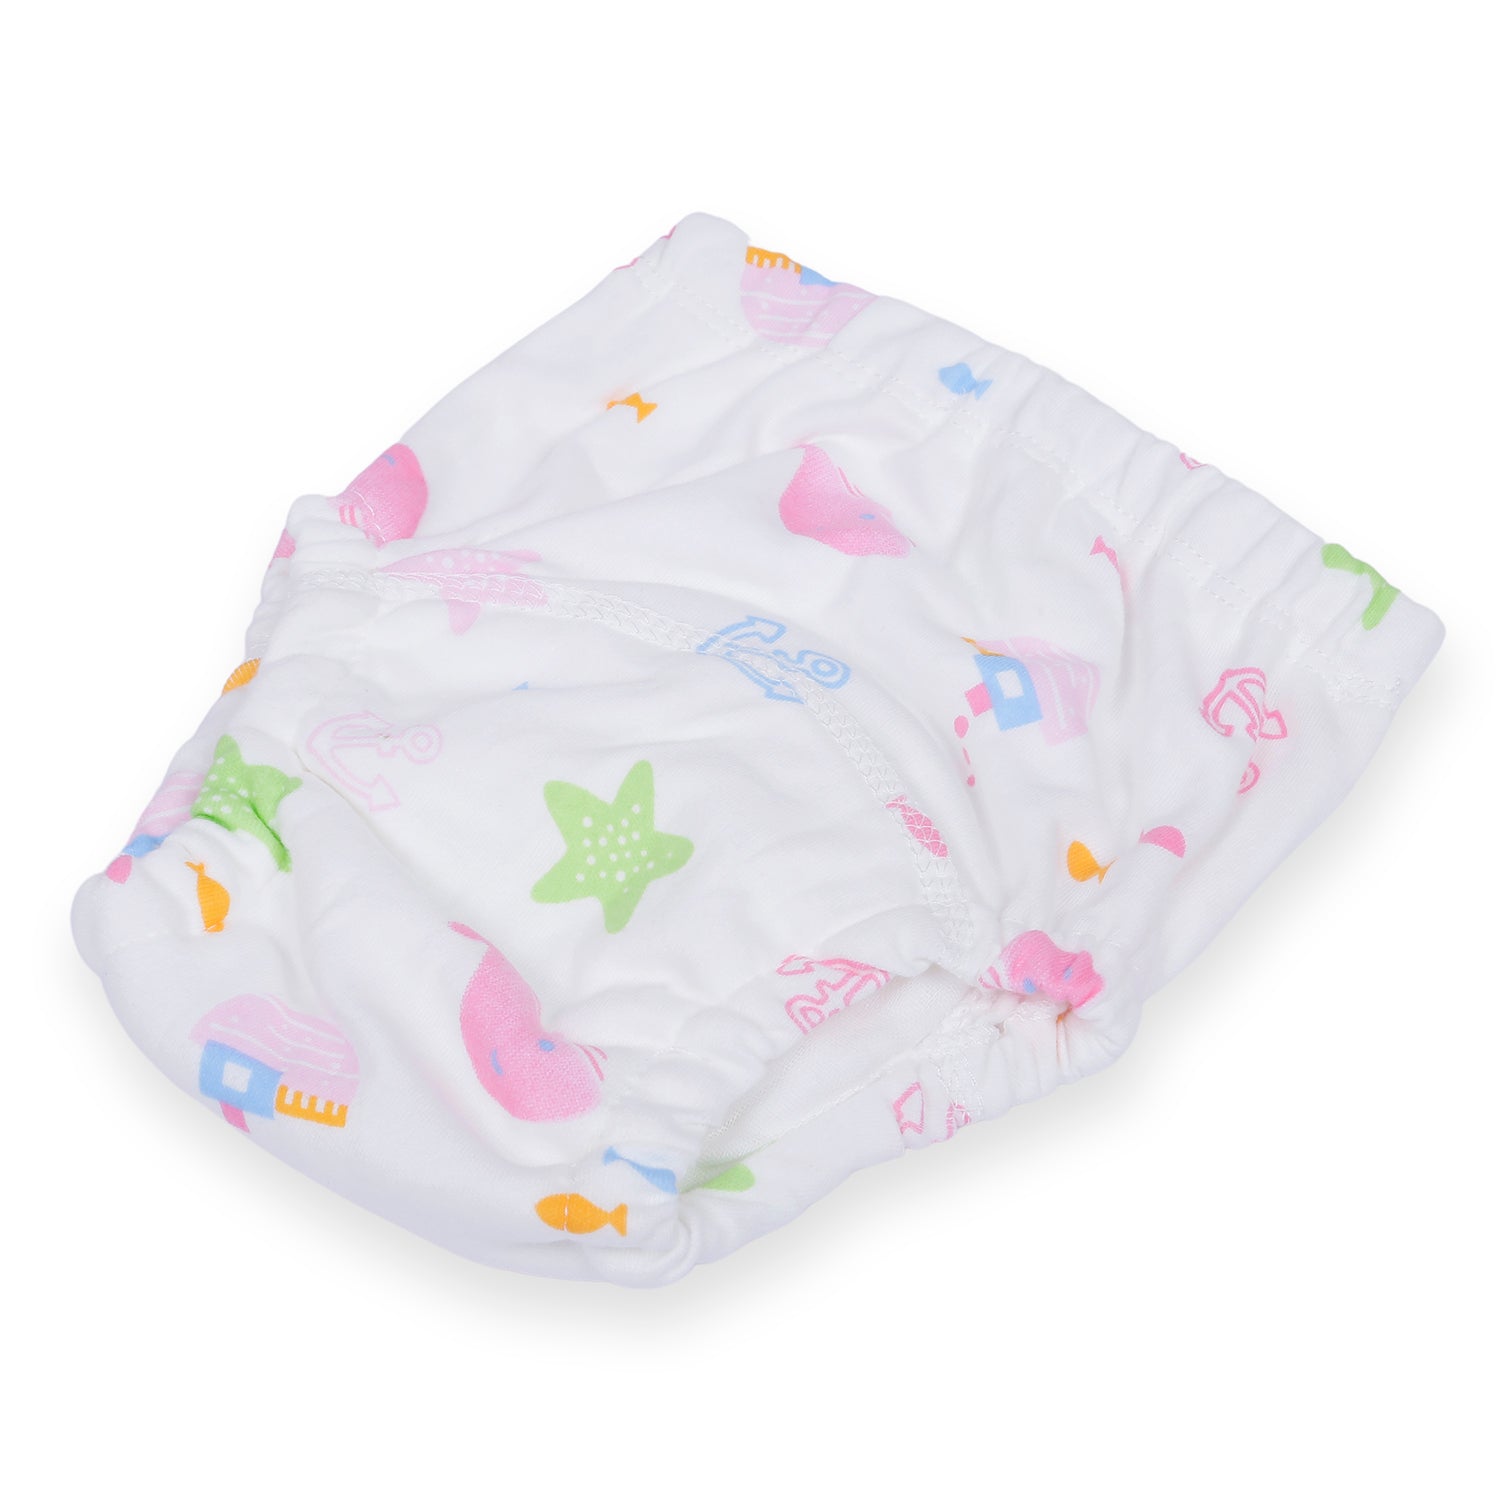 Ocean Reusable Cloth Training Pants Clothing Accessory Diaper Panty - Multicolour - Baby Moo